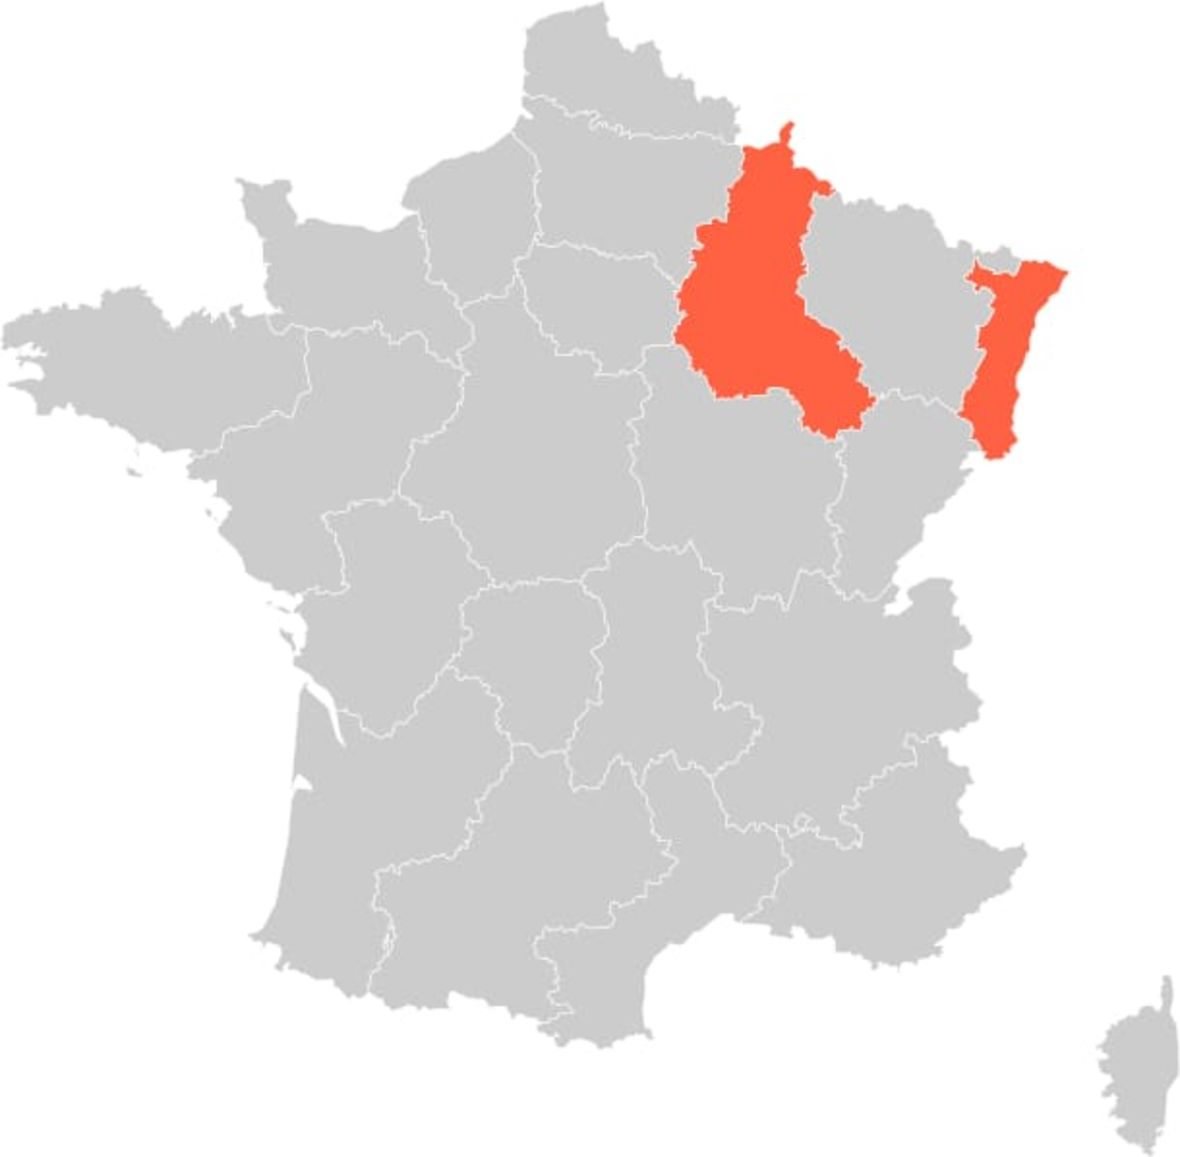 France Alsace and Champagne Region Map